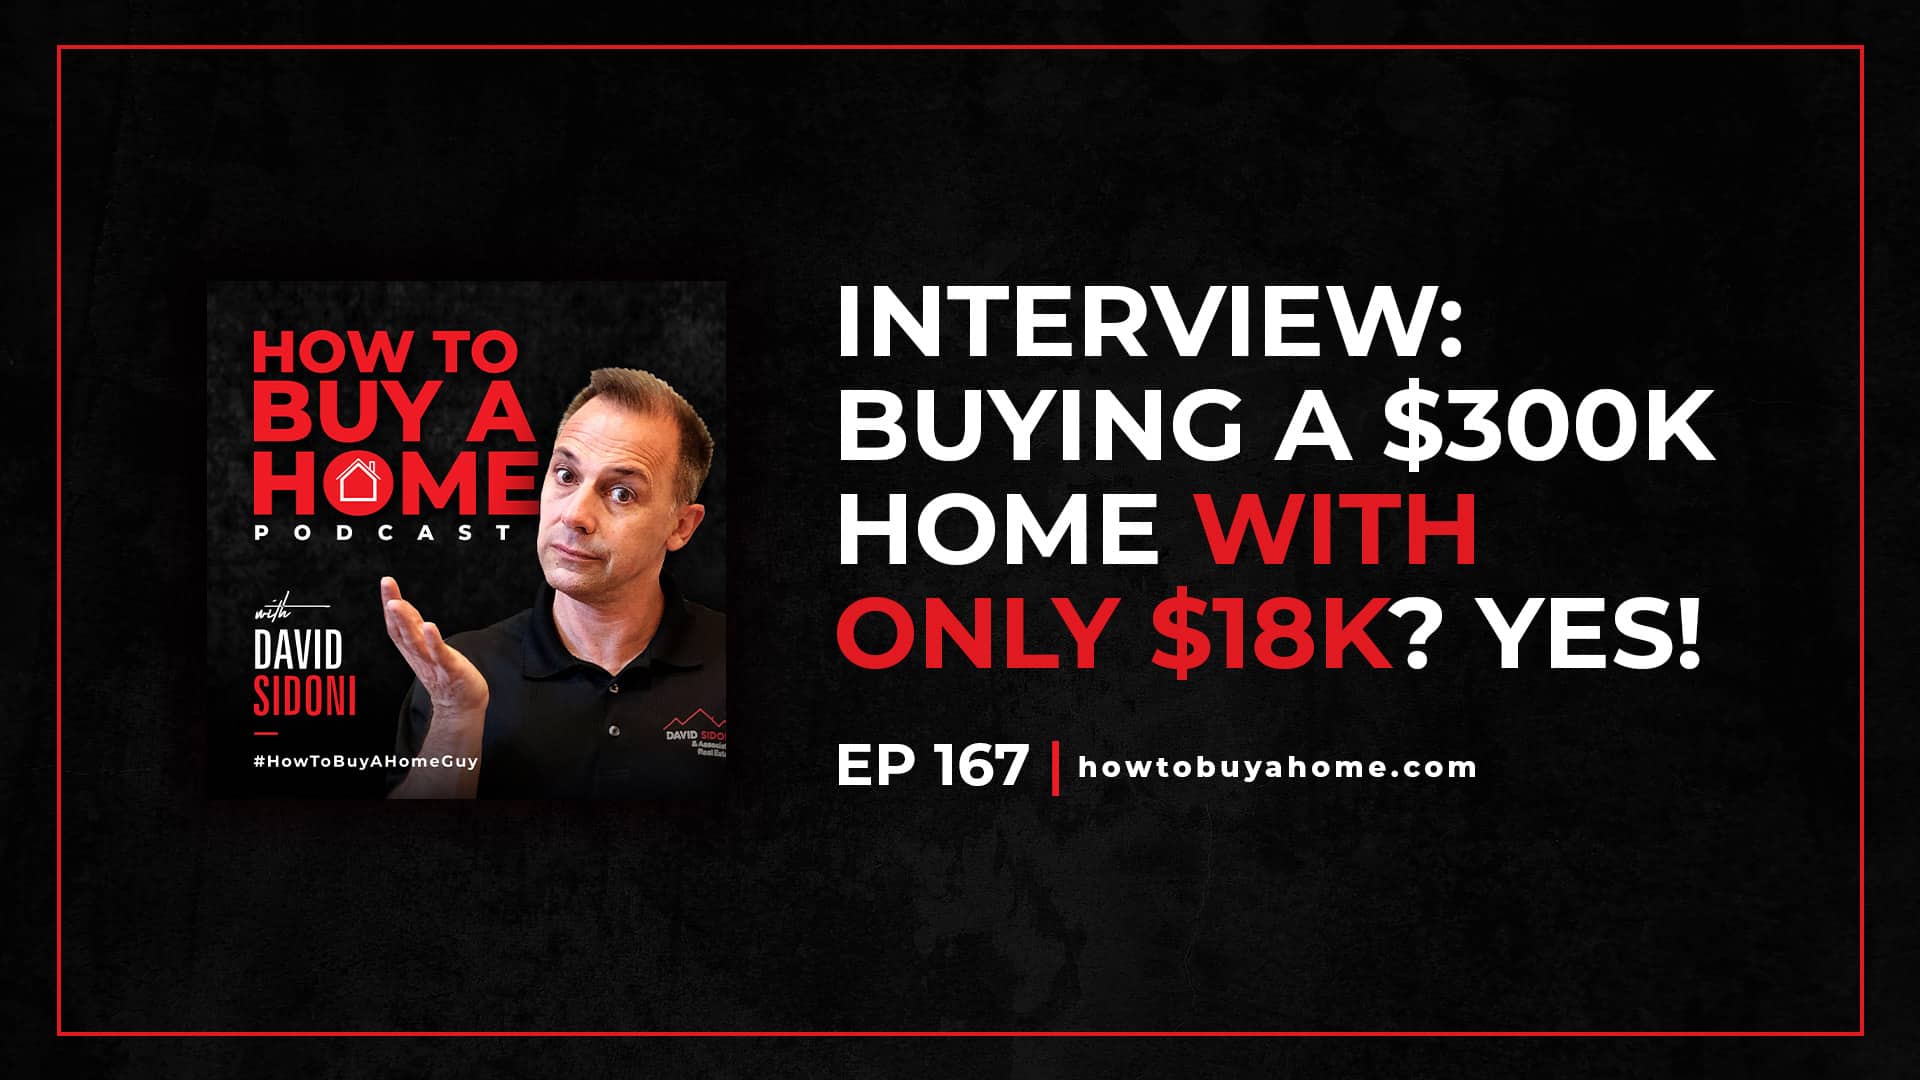 Ep. 167 – Interview Buying a $300K Home With Only $18k Yes!